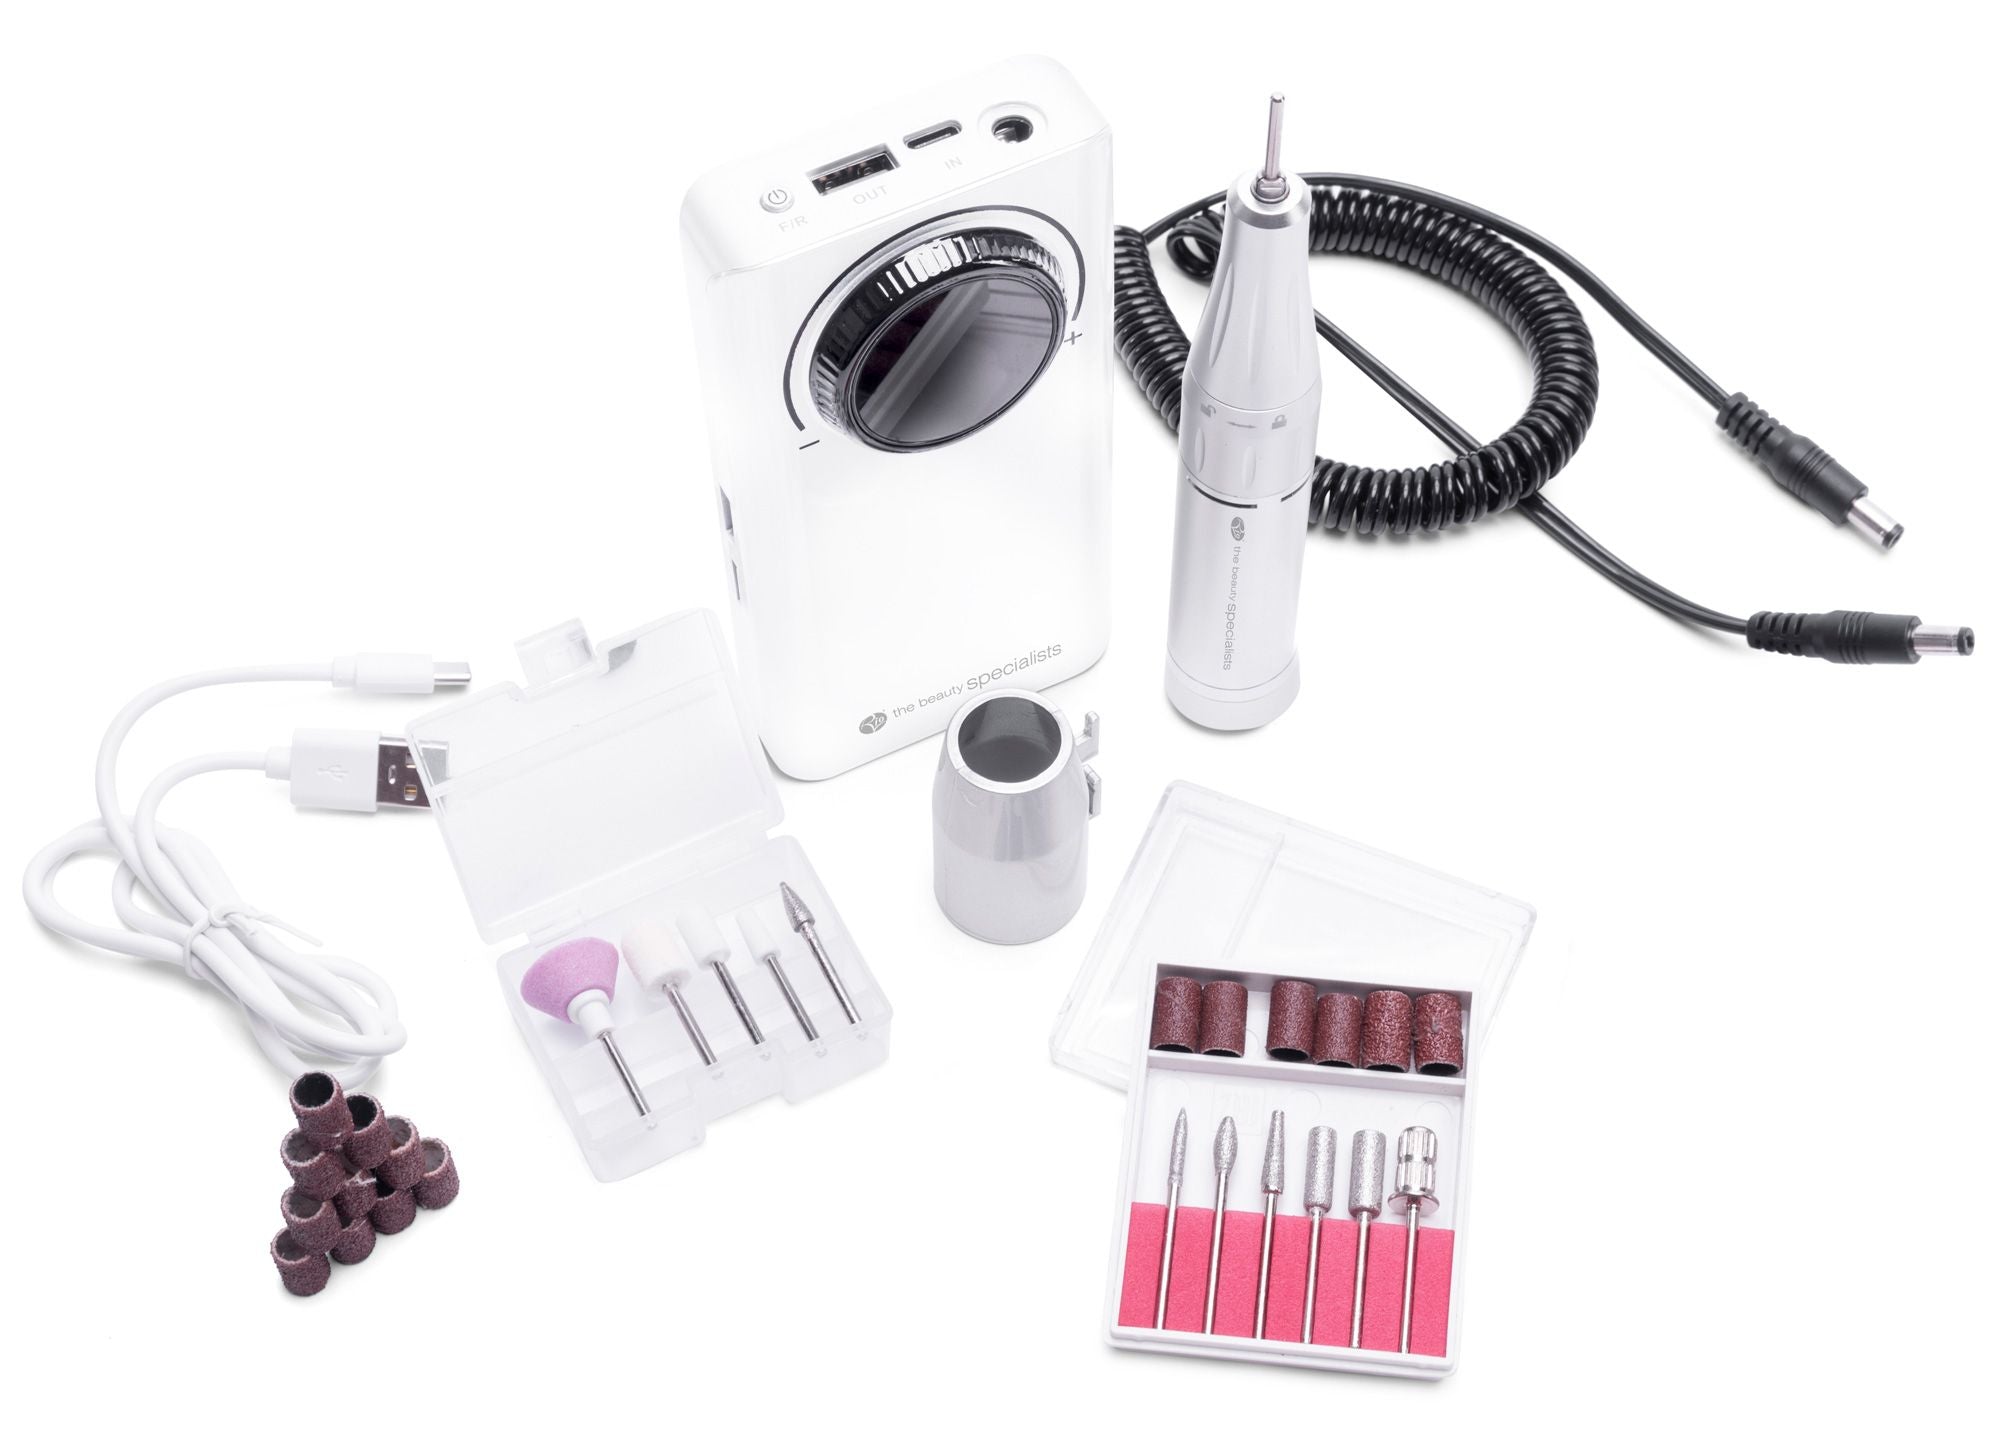 Electric nail file for toenails with portable wearable controller and kit contents laid out including additional drill heads usb charging cable mandrel sanding bands and connection cable 